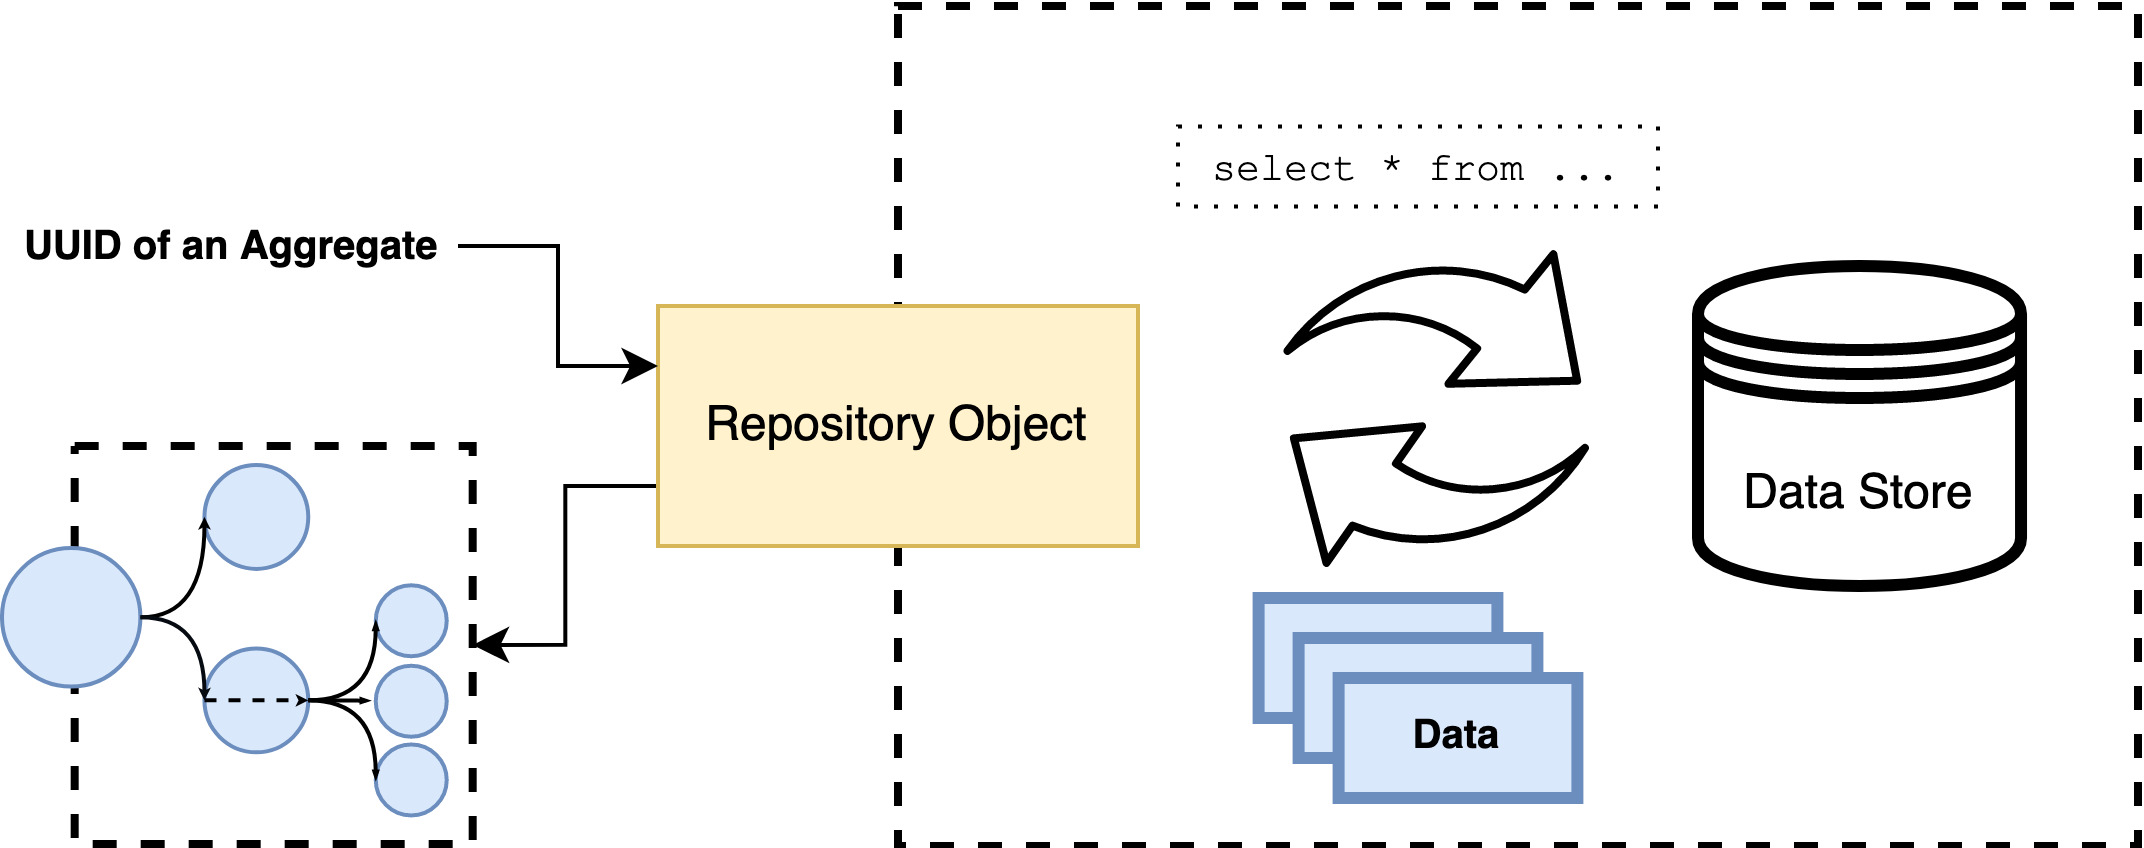 Repository returns an aggregate